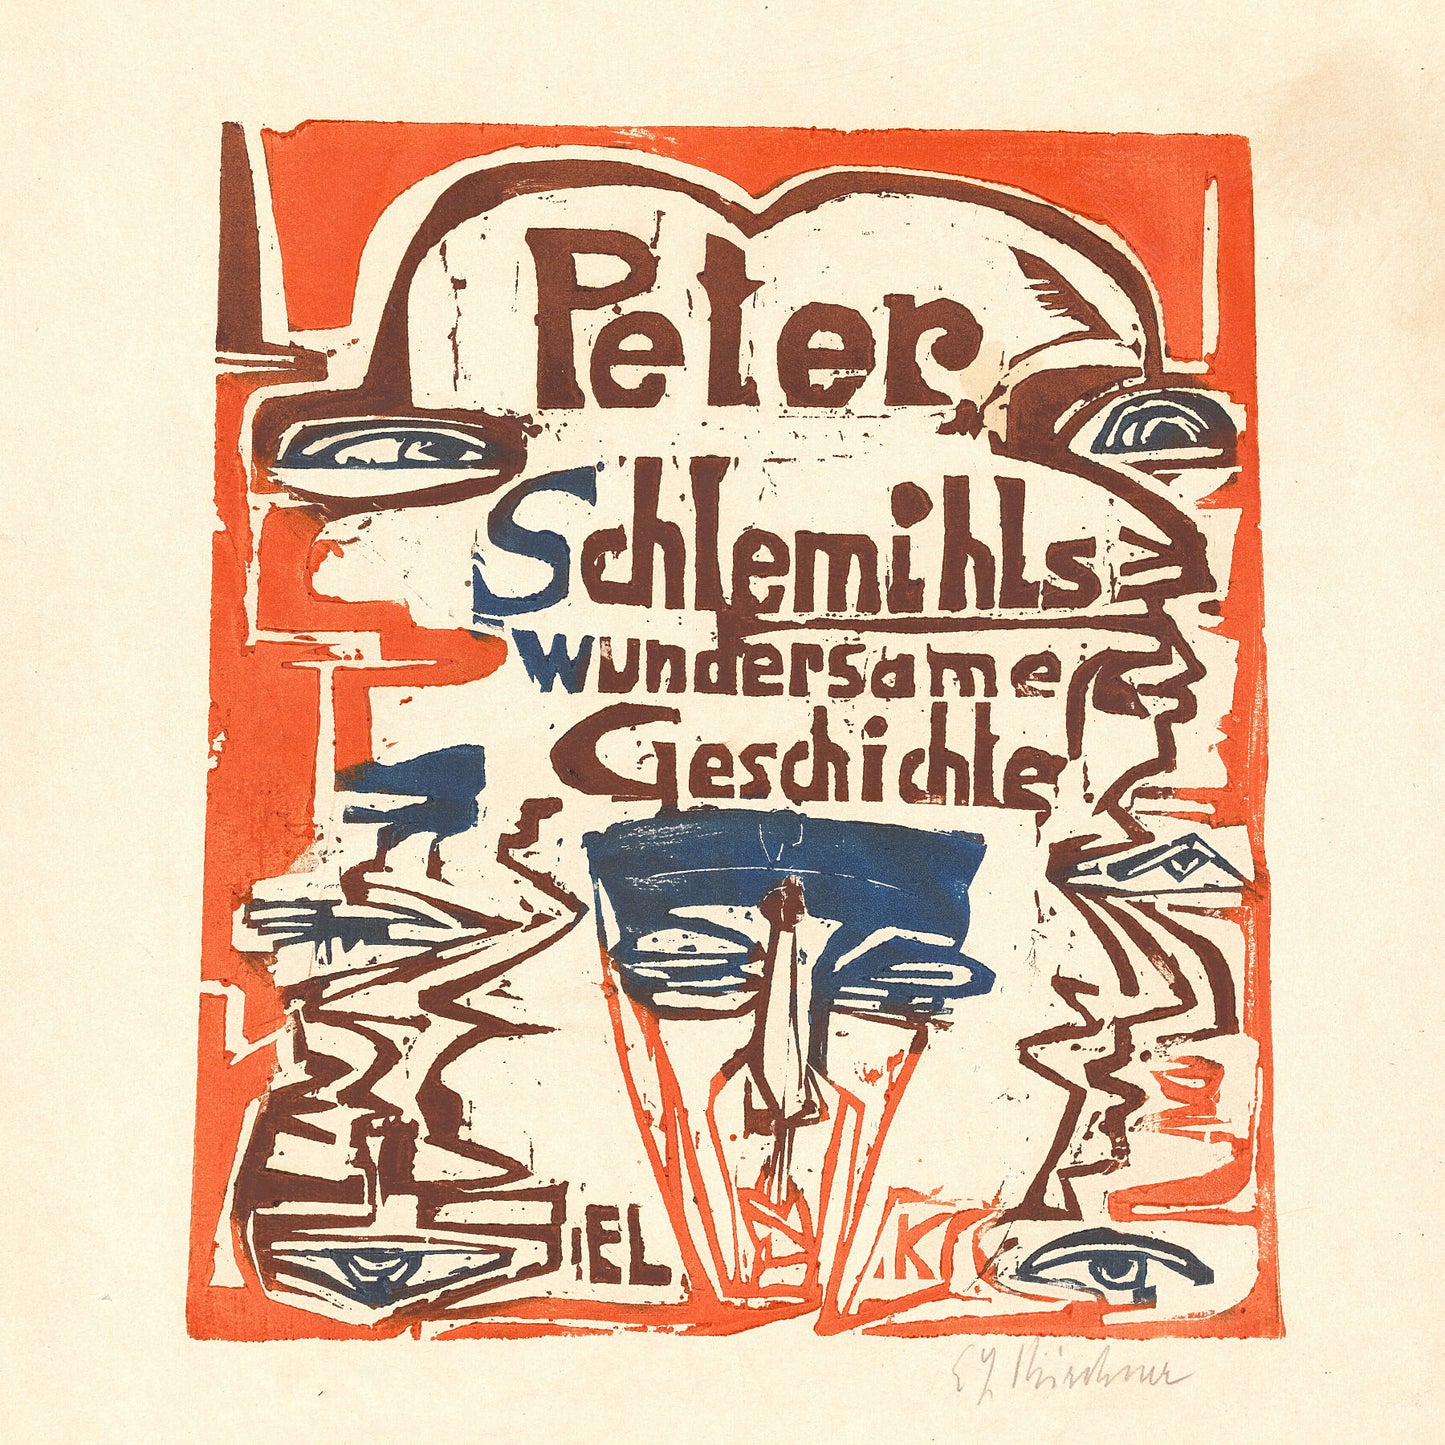 Peter Schlemihls Wundersame Geschichte (Peter Schlemihl's Wondrous Story) (Title Page) by Ernst Ludwig Kirchner - 1915